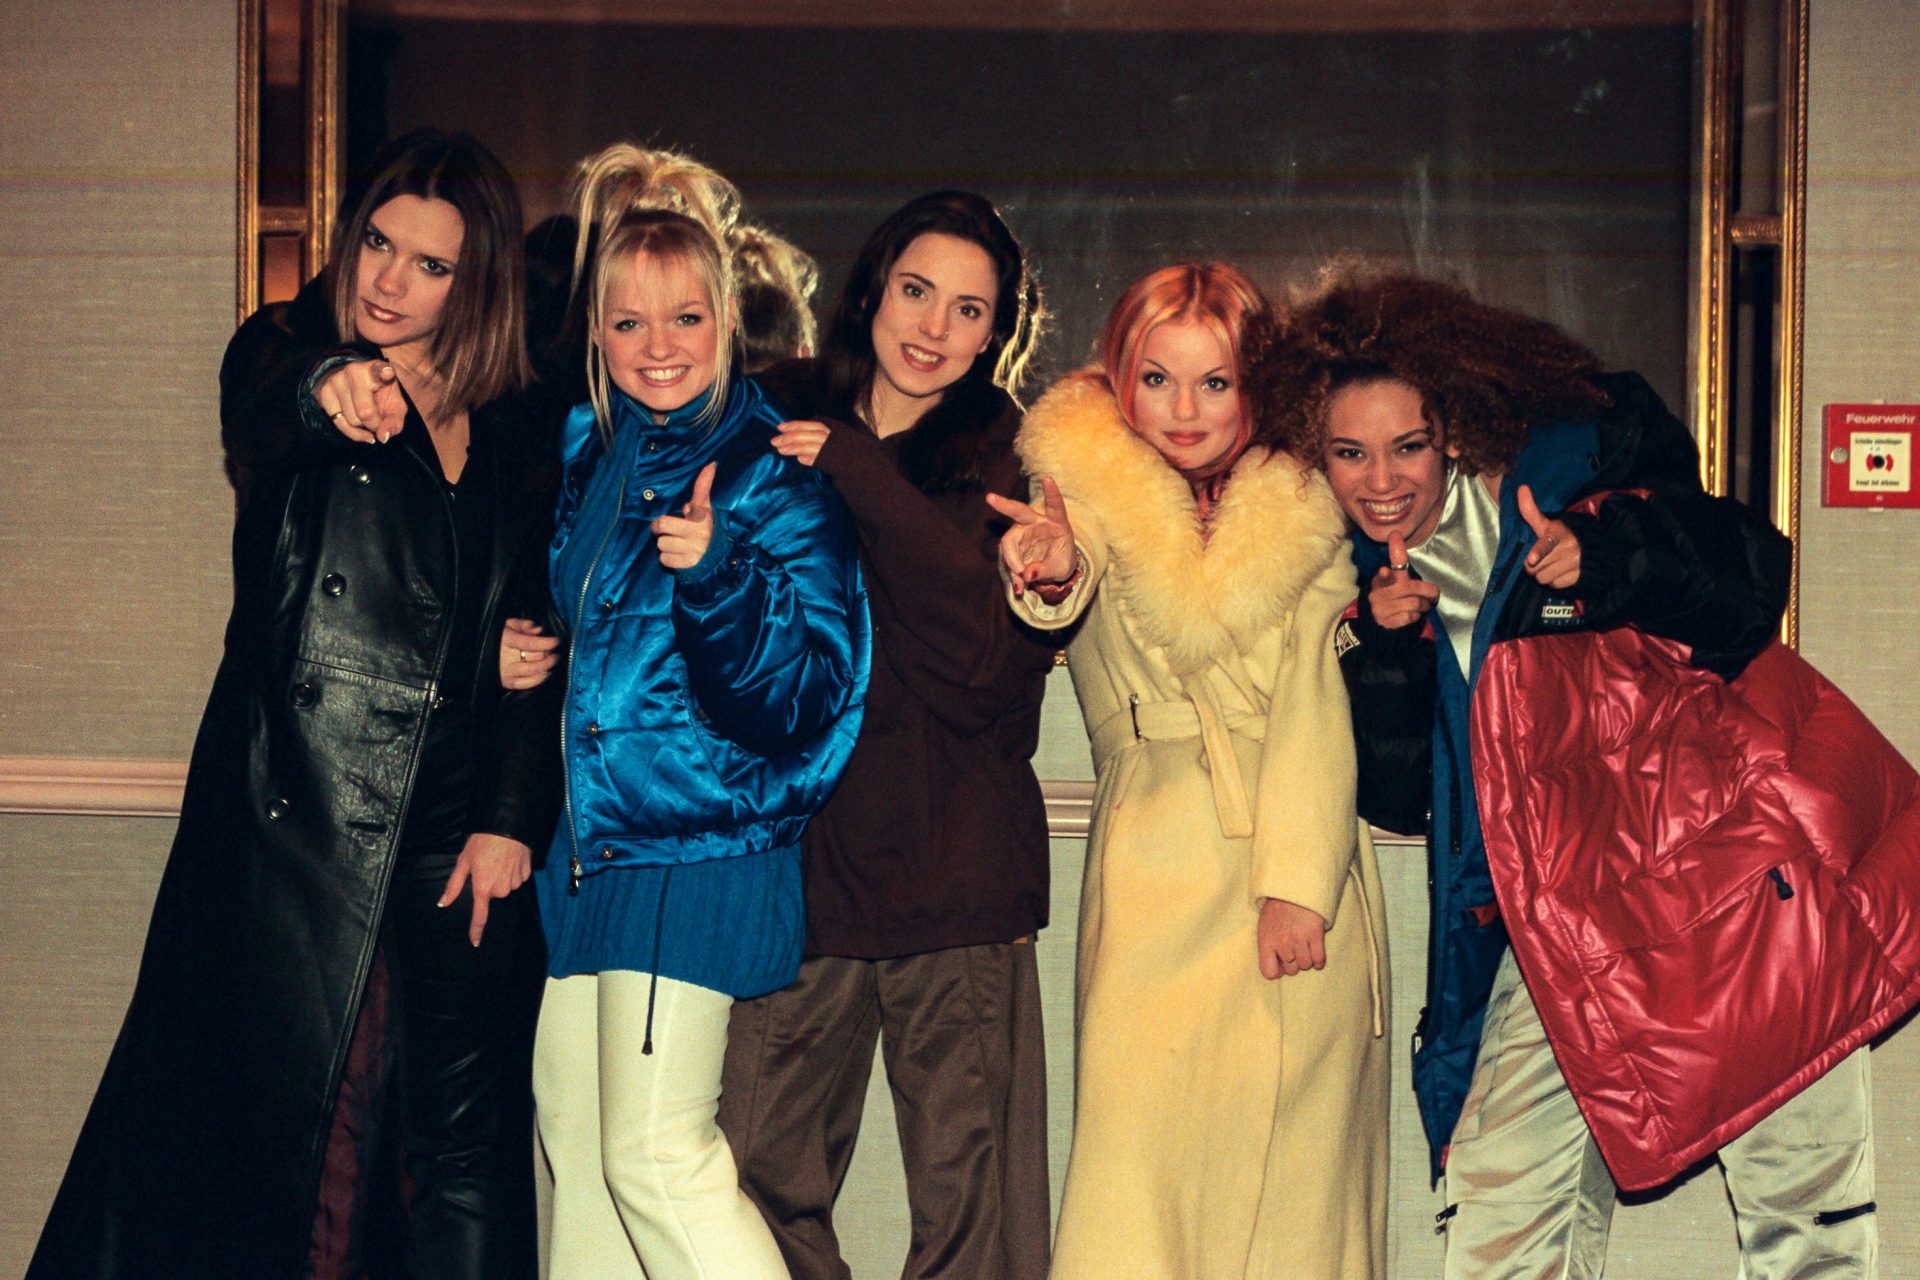 A legendary company's connection with the Spice Girls